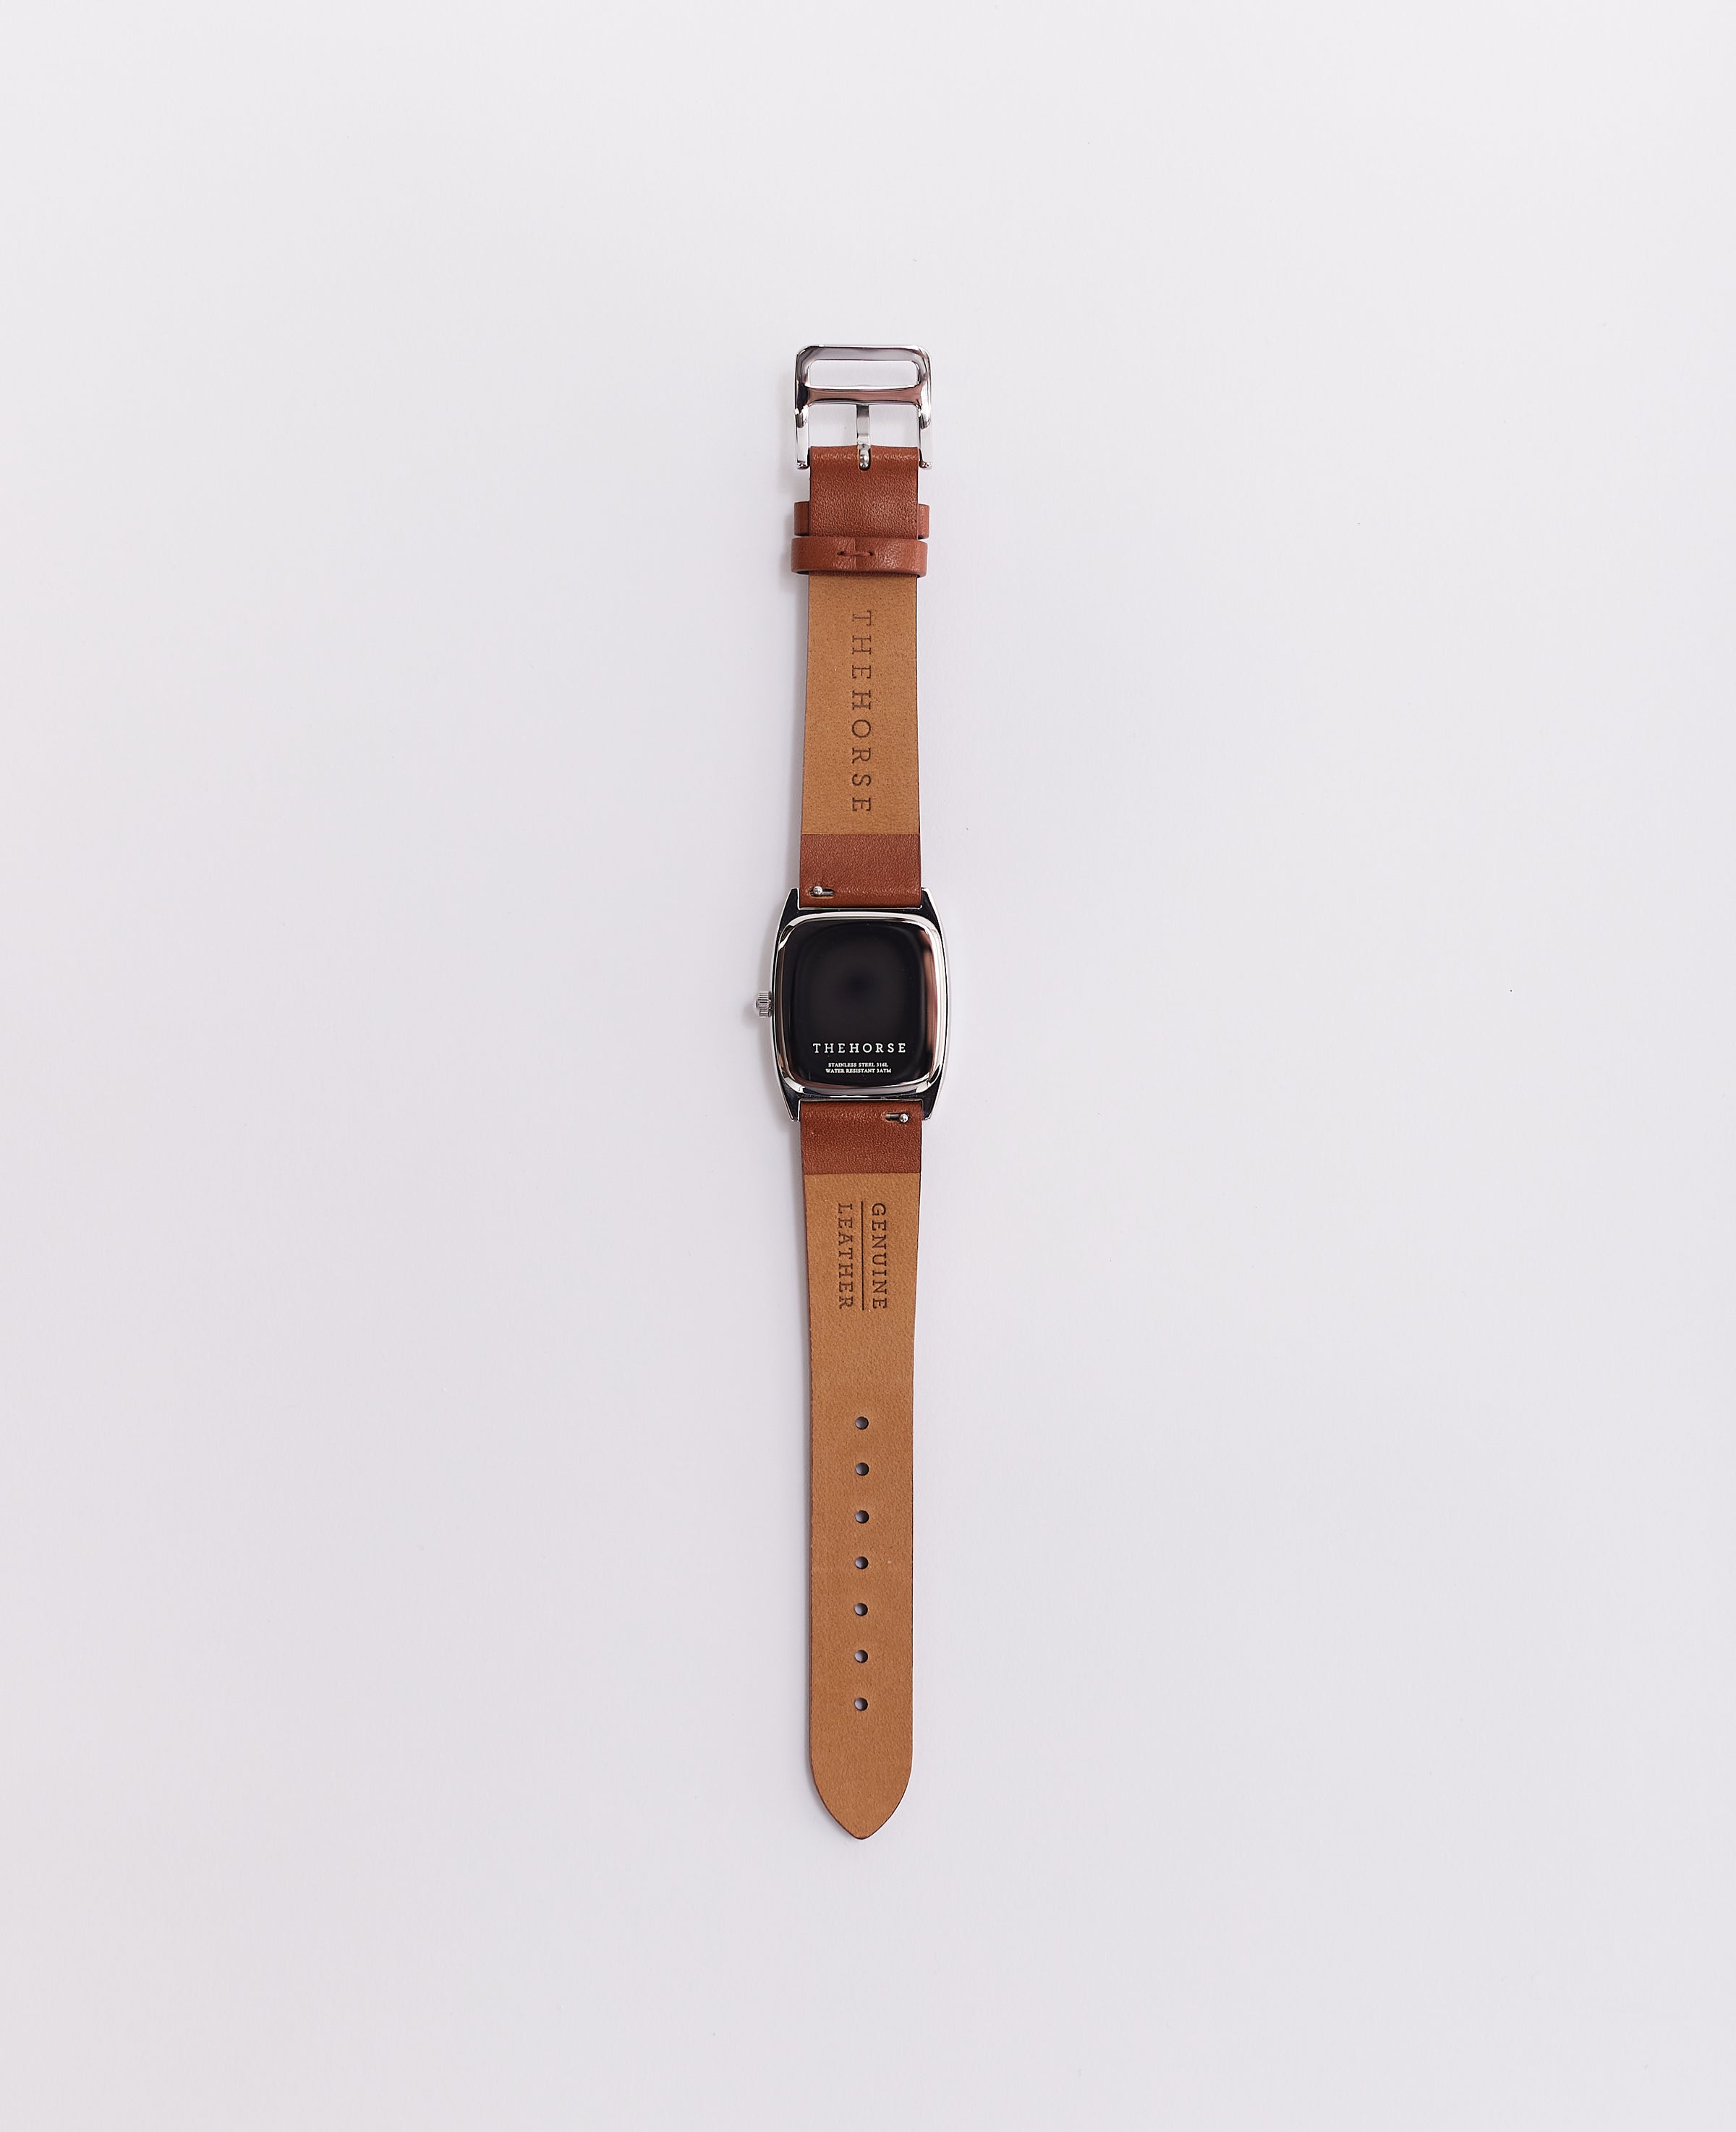 The Dress Watch: Polished Silver / White Dial / Tan Leather